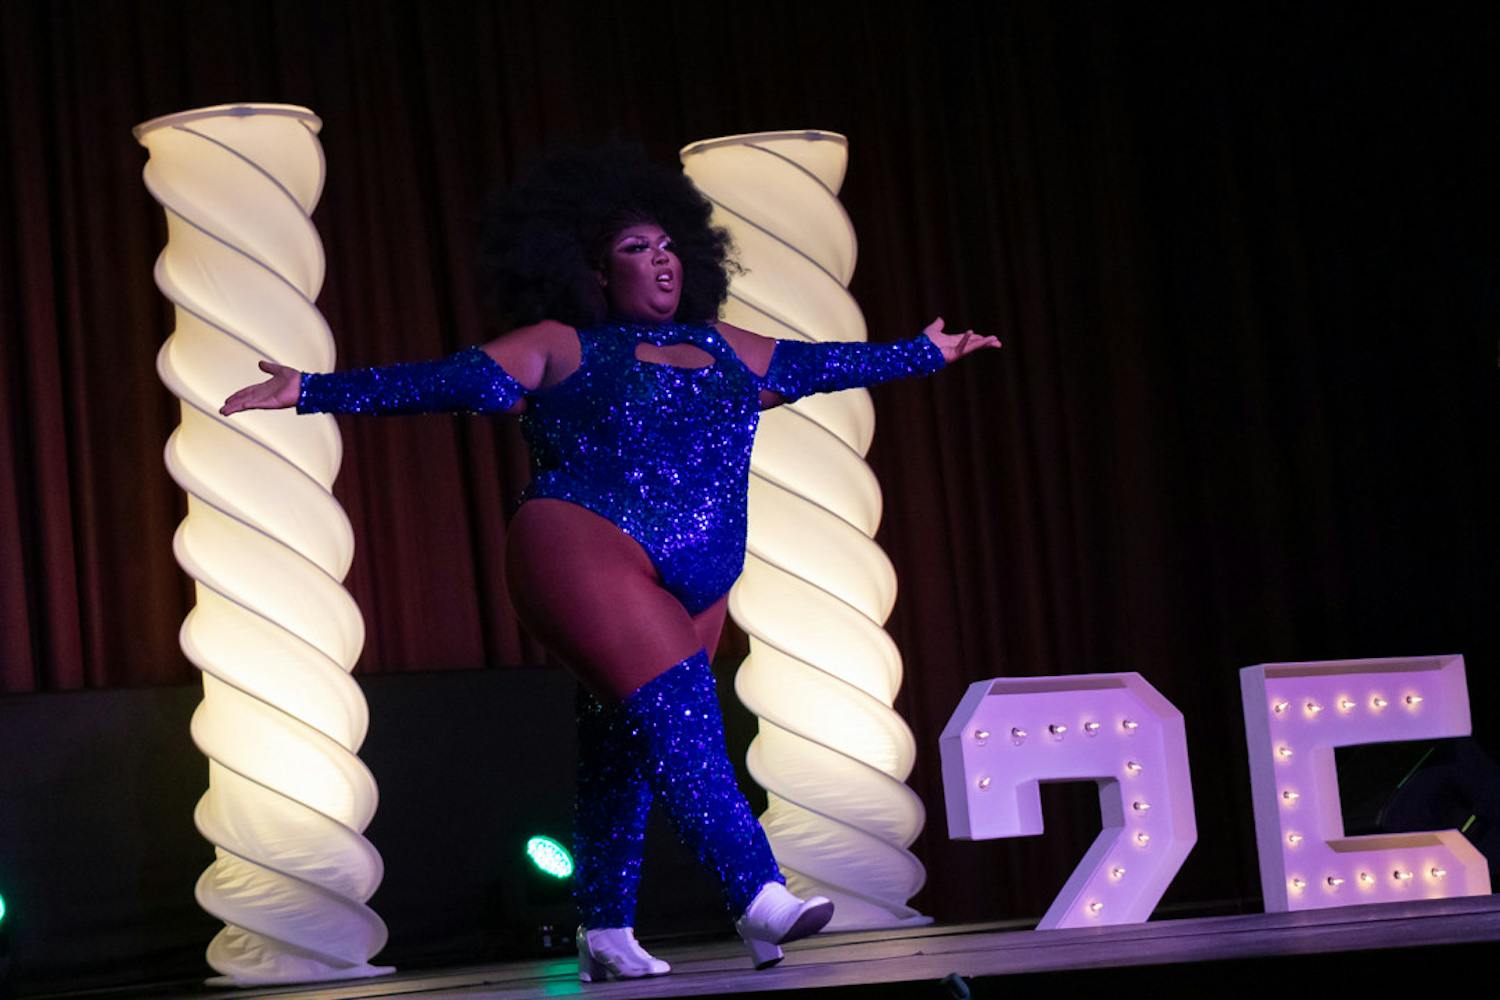 Kenya Pleaser struts down the runway of the Birdcage drag show. The event was organized by Carolina Productions and IRIS on April 12, 2023.